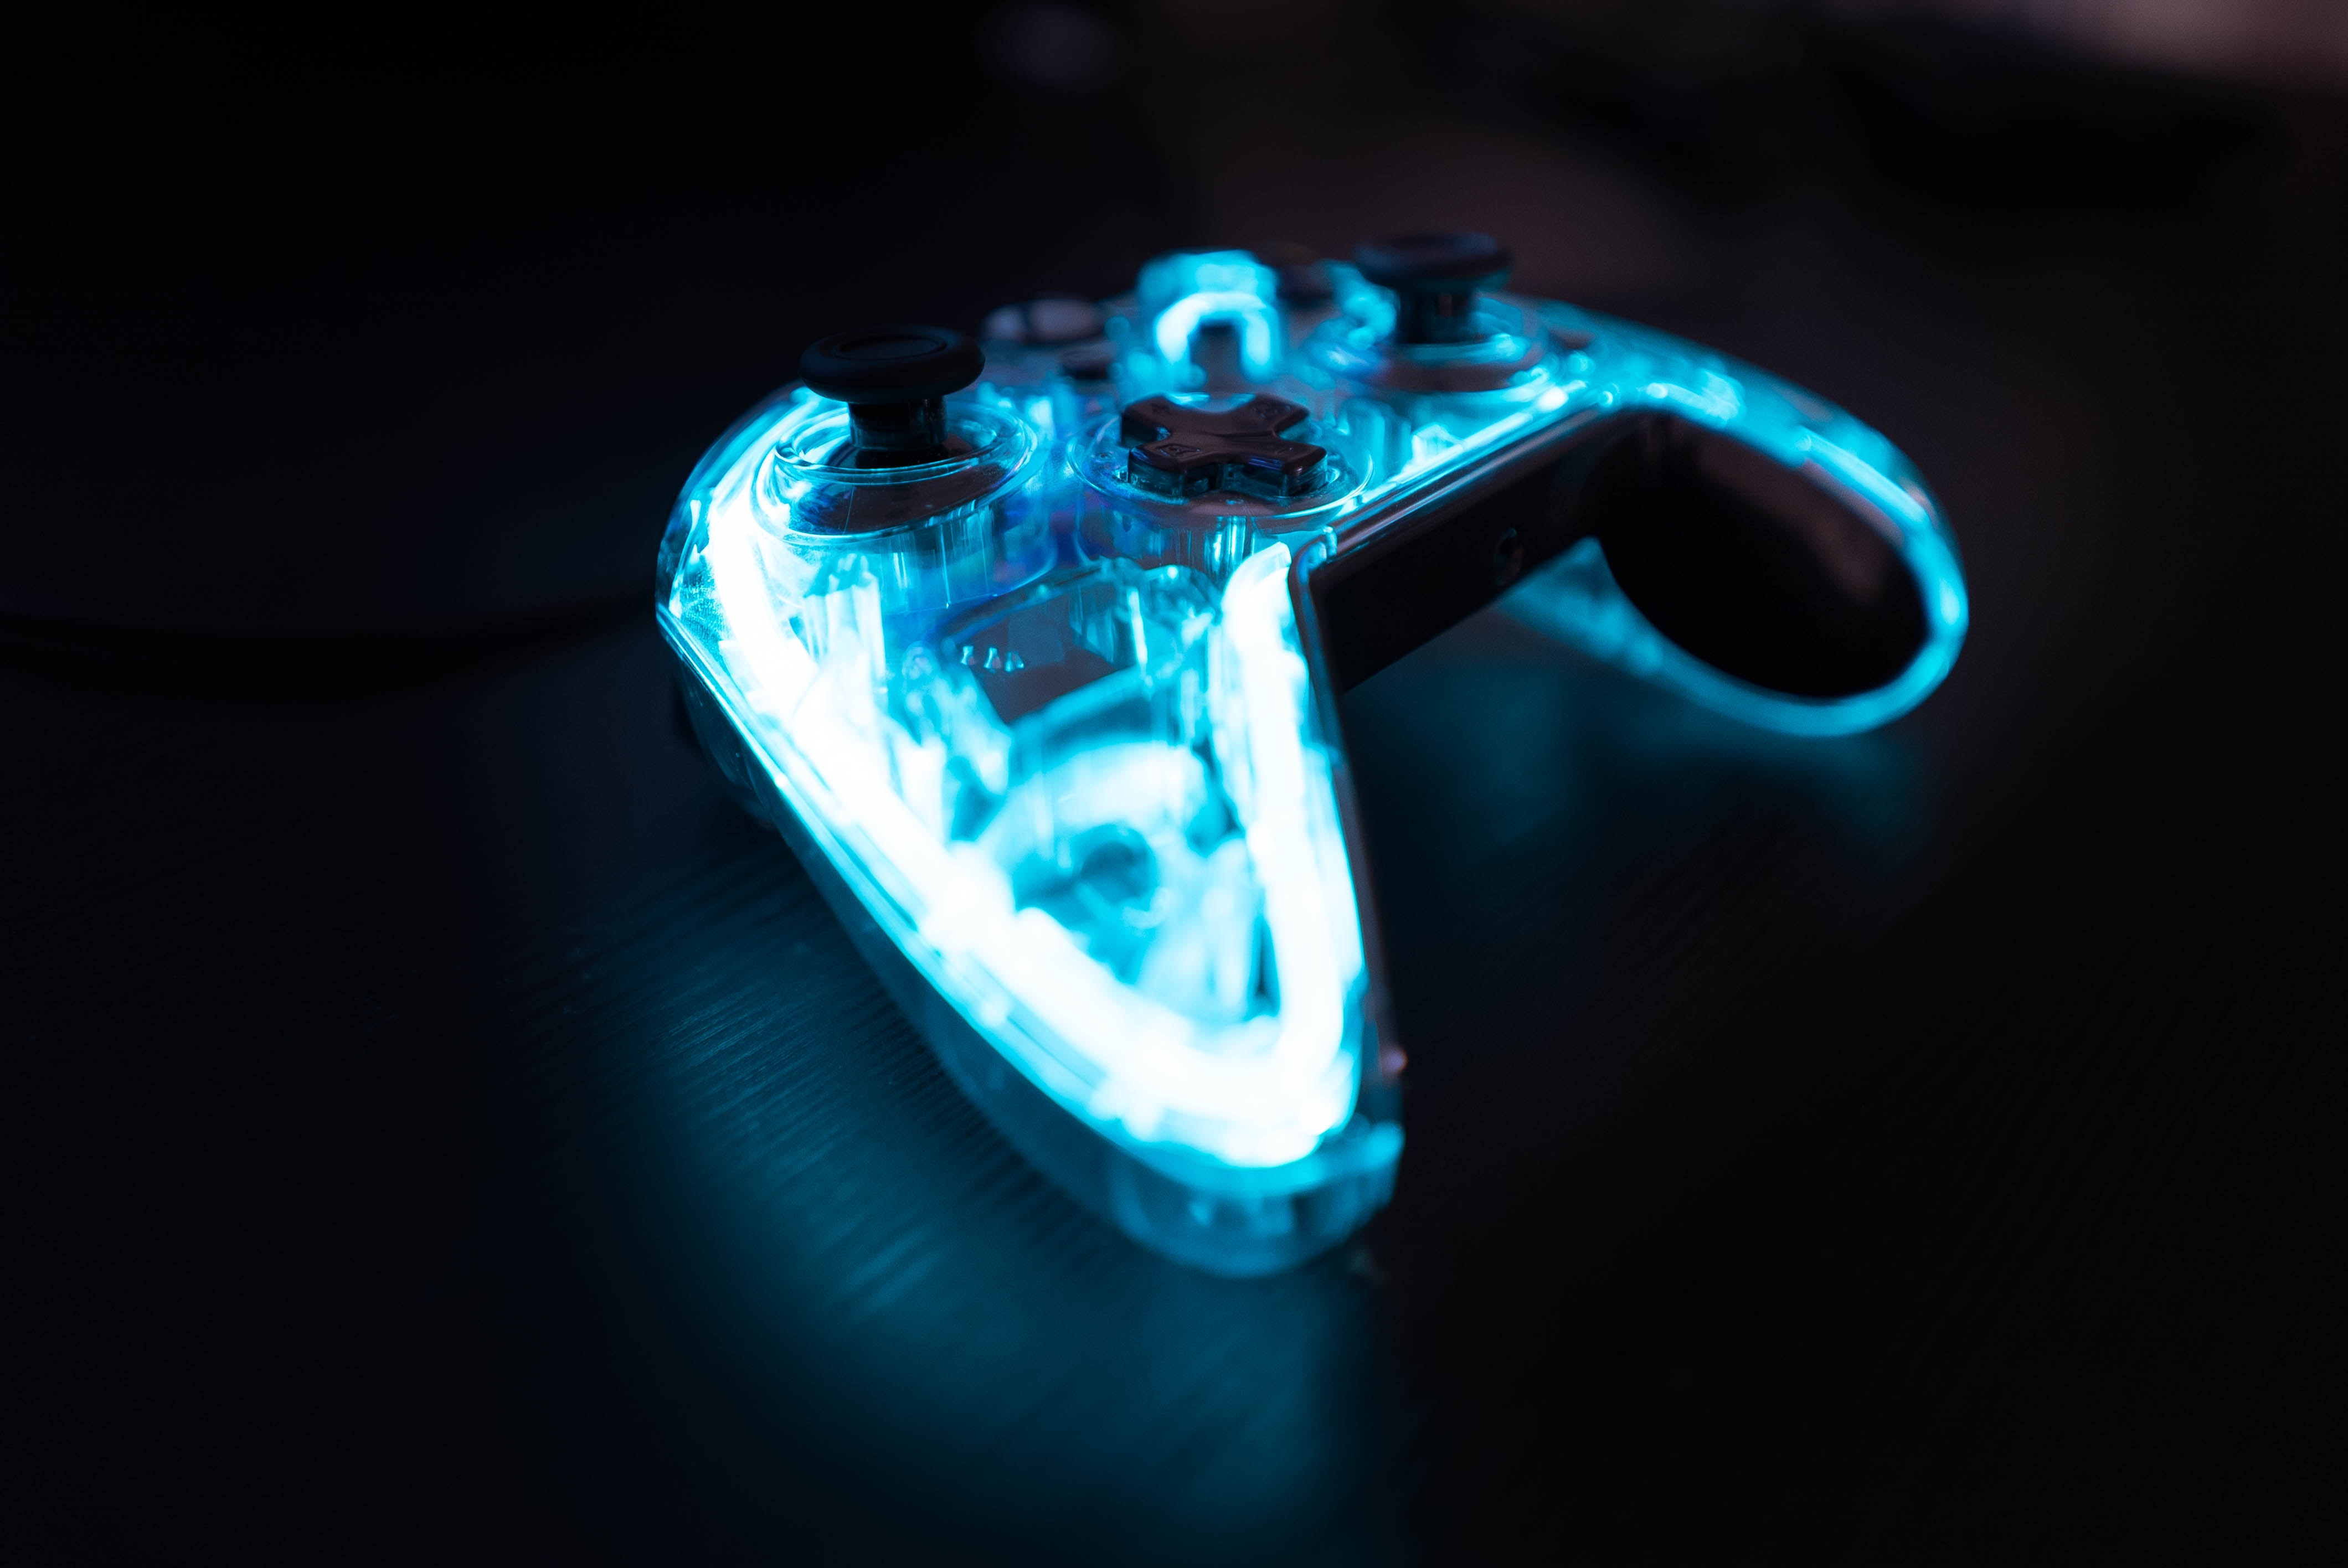 Game Controller Photo, Download Free Game Controller & HD Image